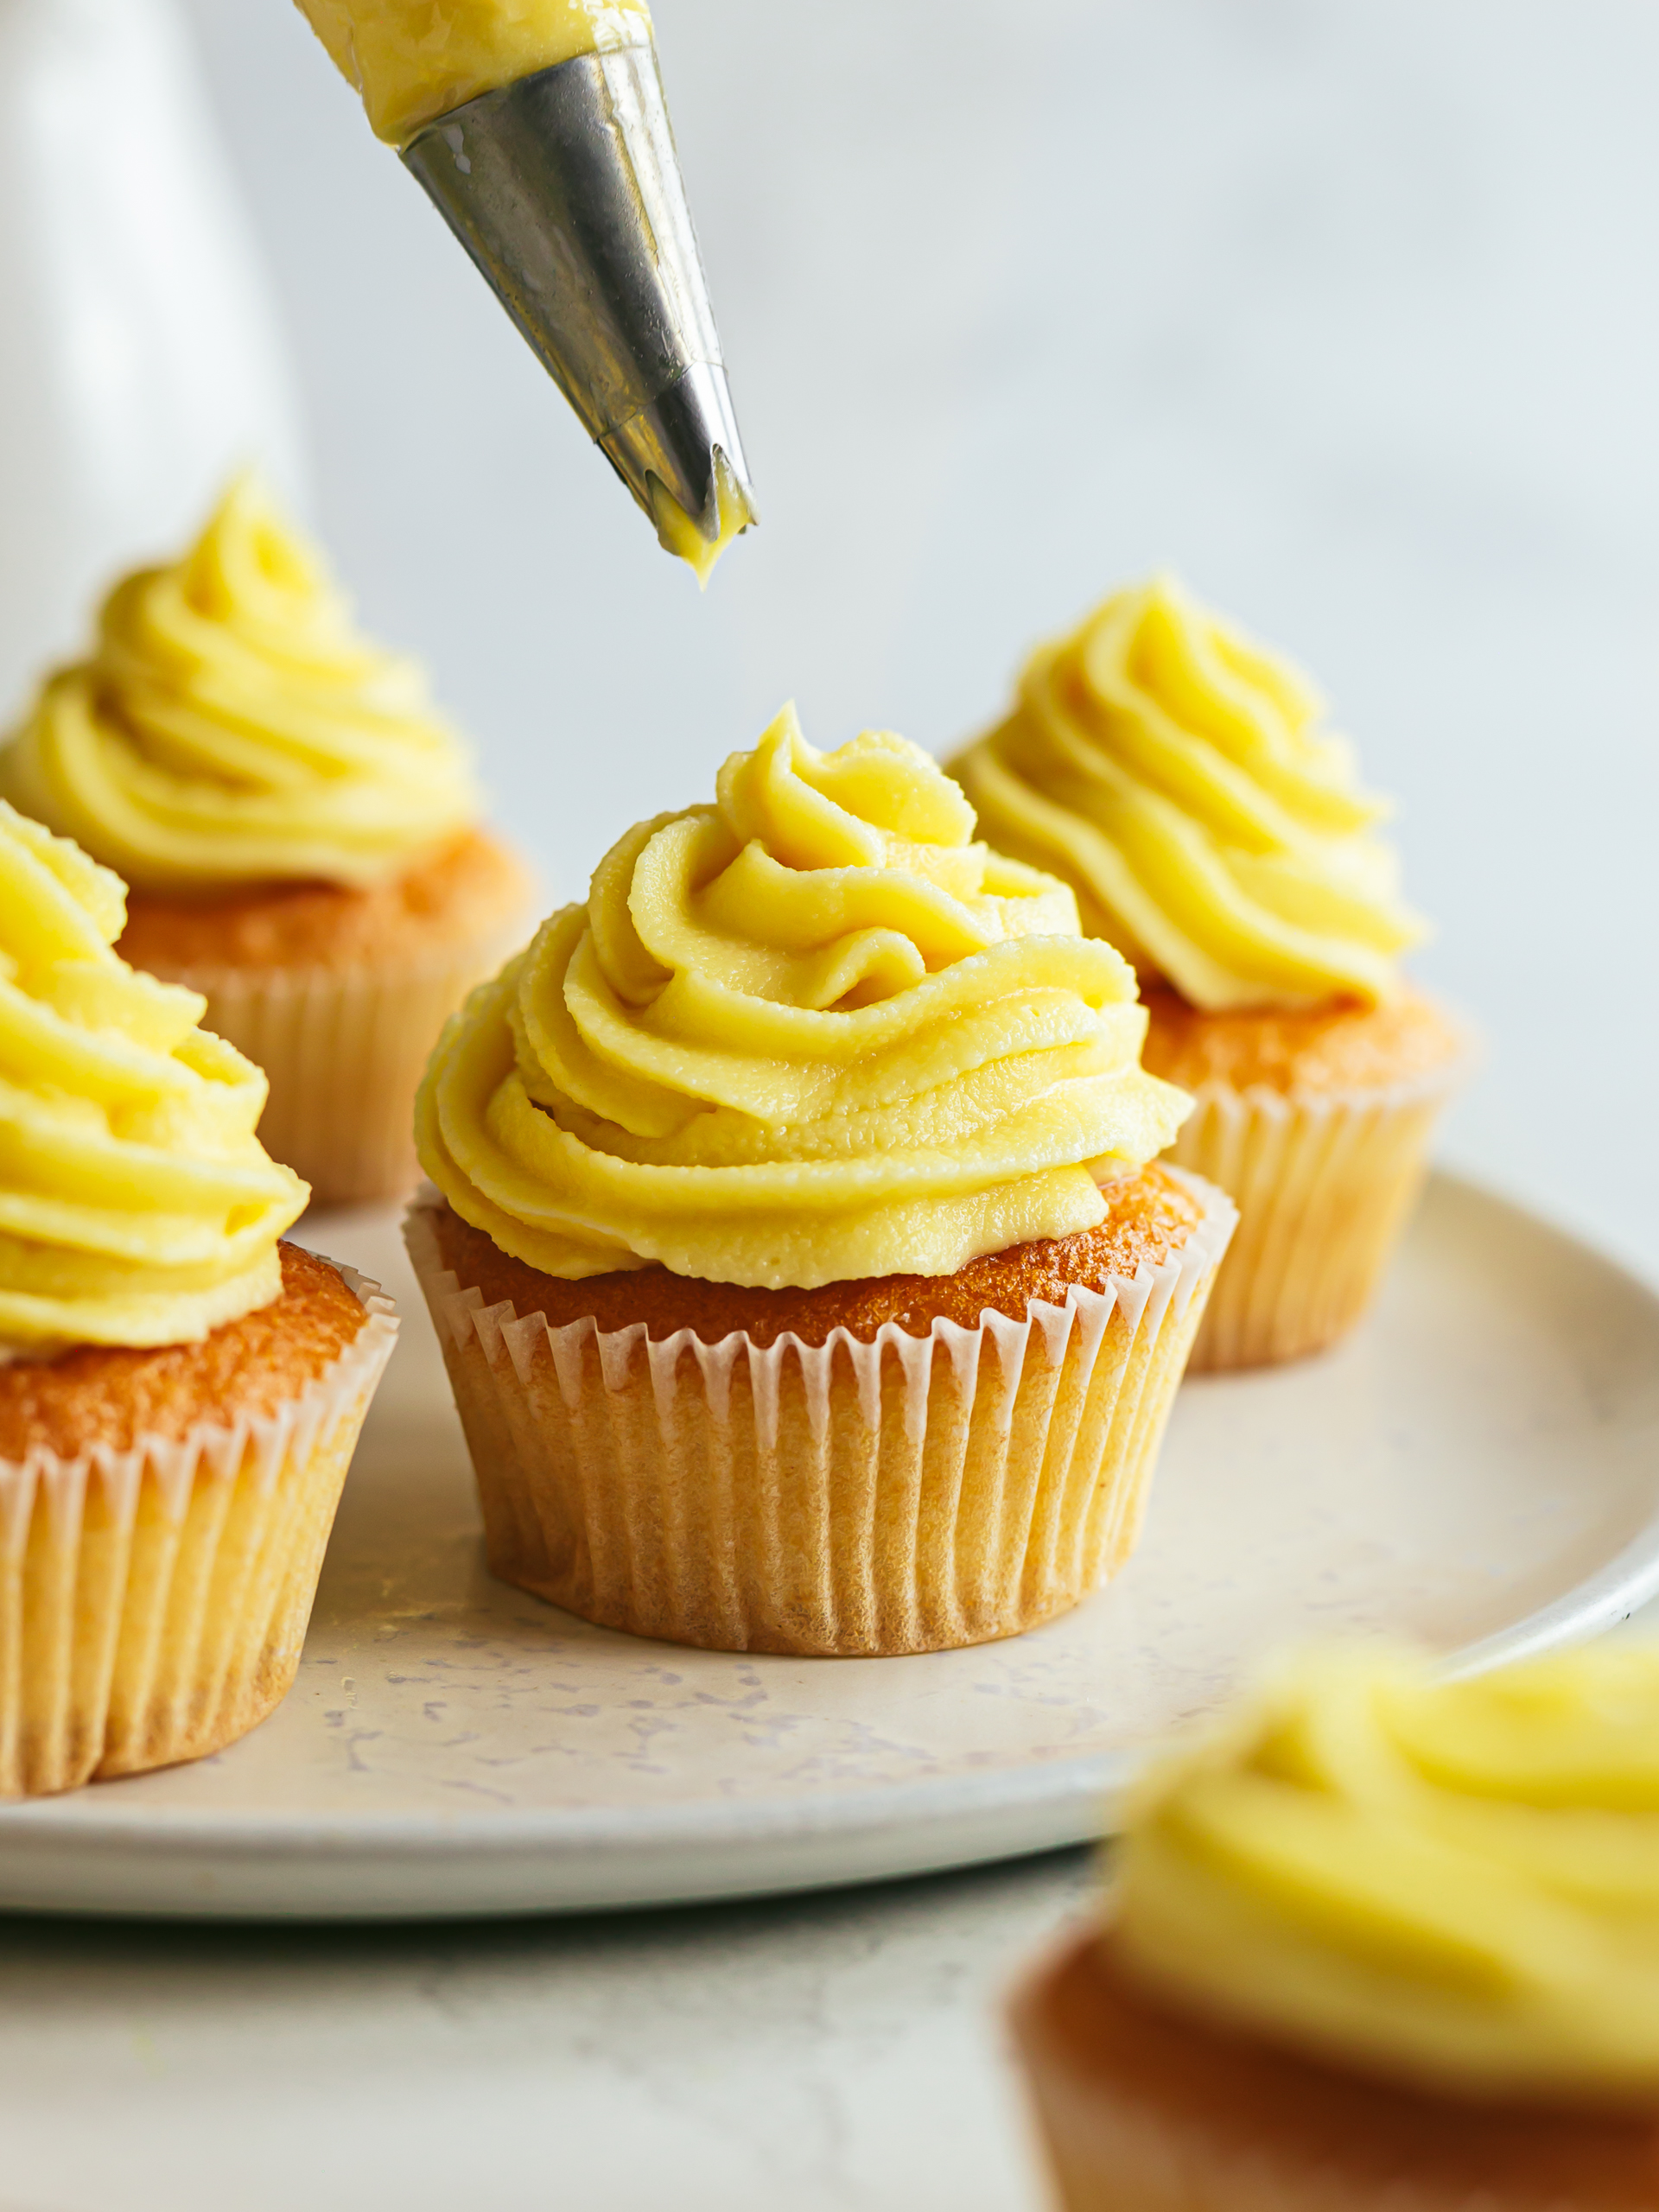 cupcakes with lemon ganache frosting